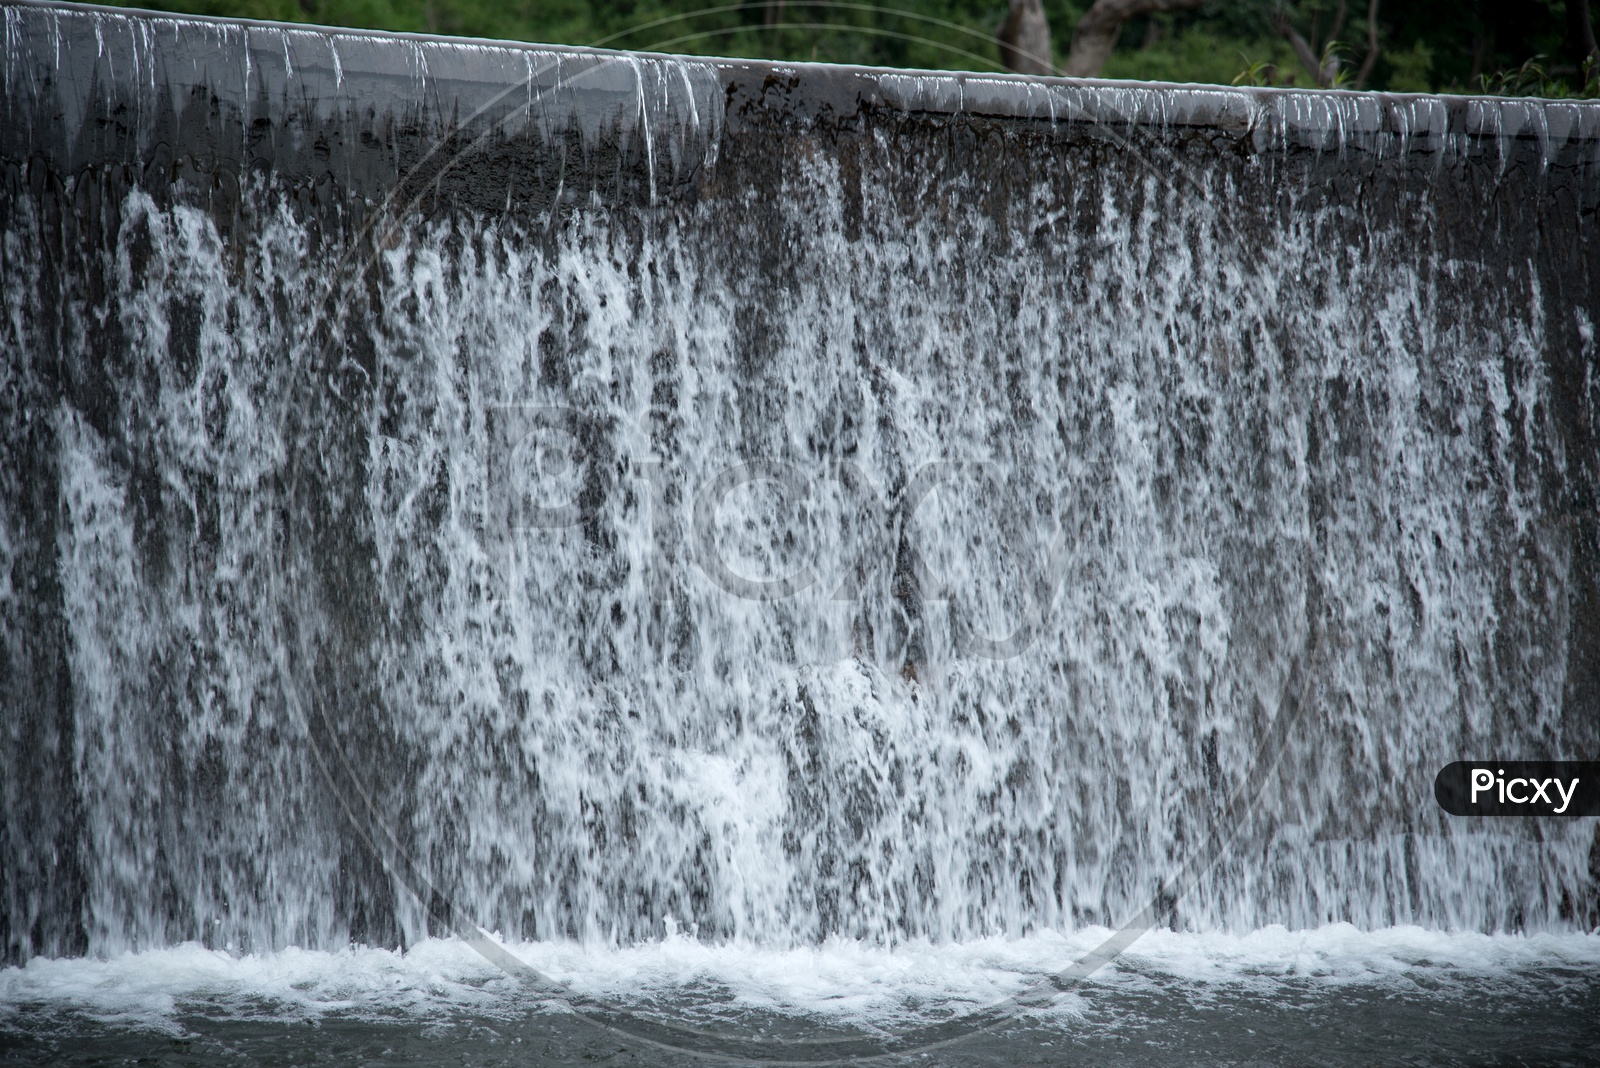 River Water Flowing Down from Check Dam Walls